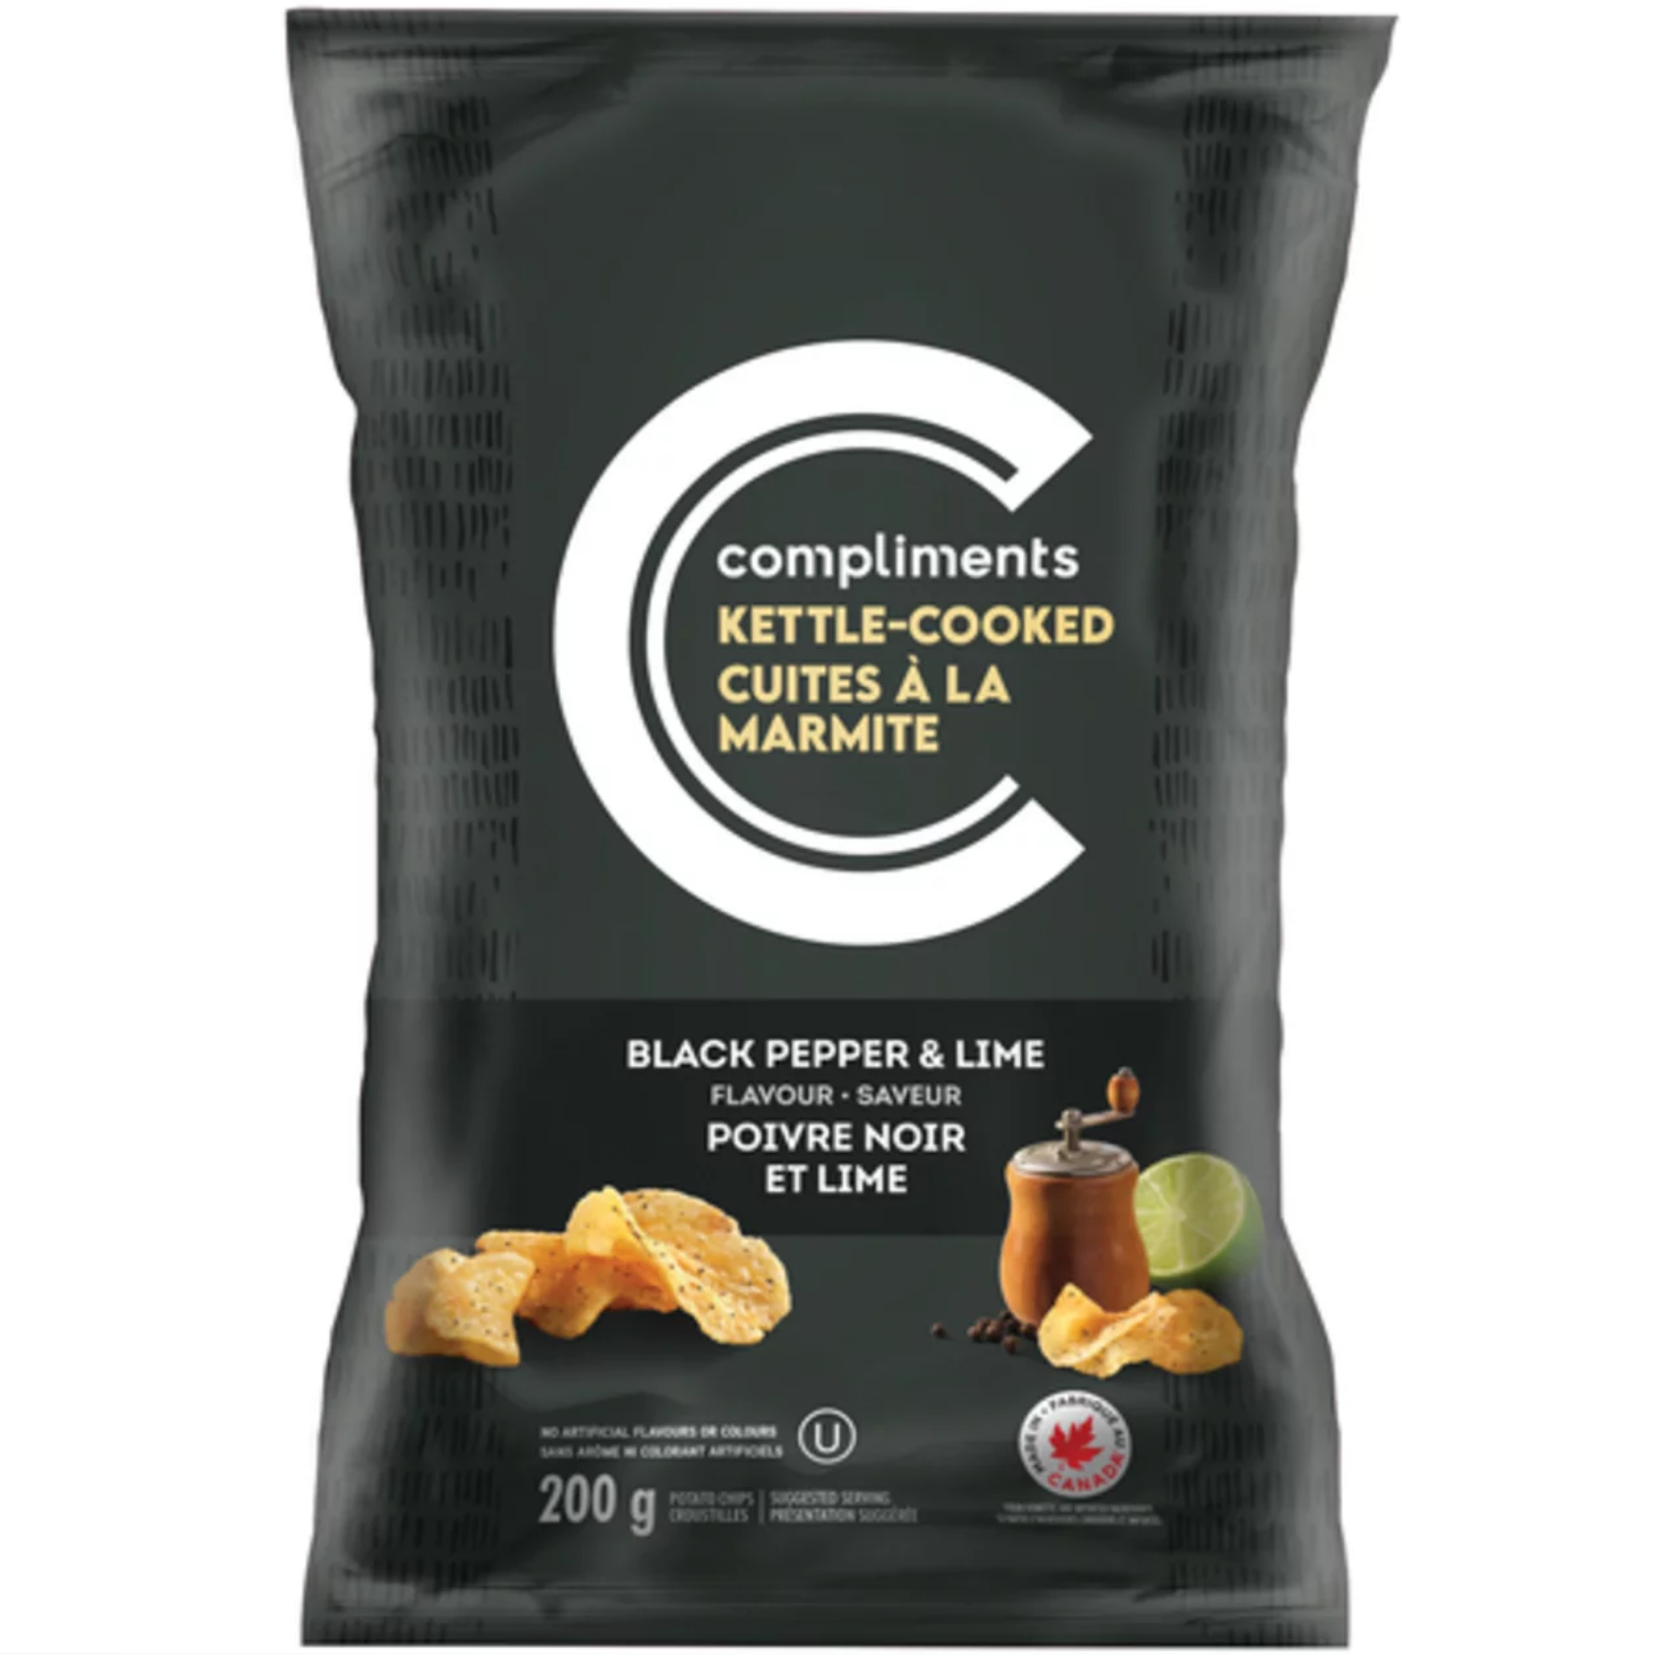 Compliments Black Pepper & Lime Kettle Cooked Potato Chips 200g